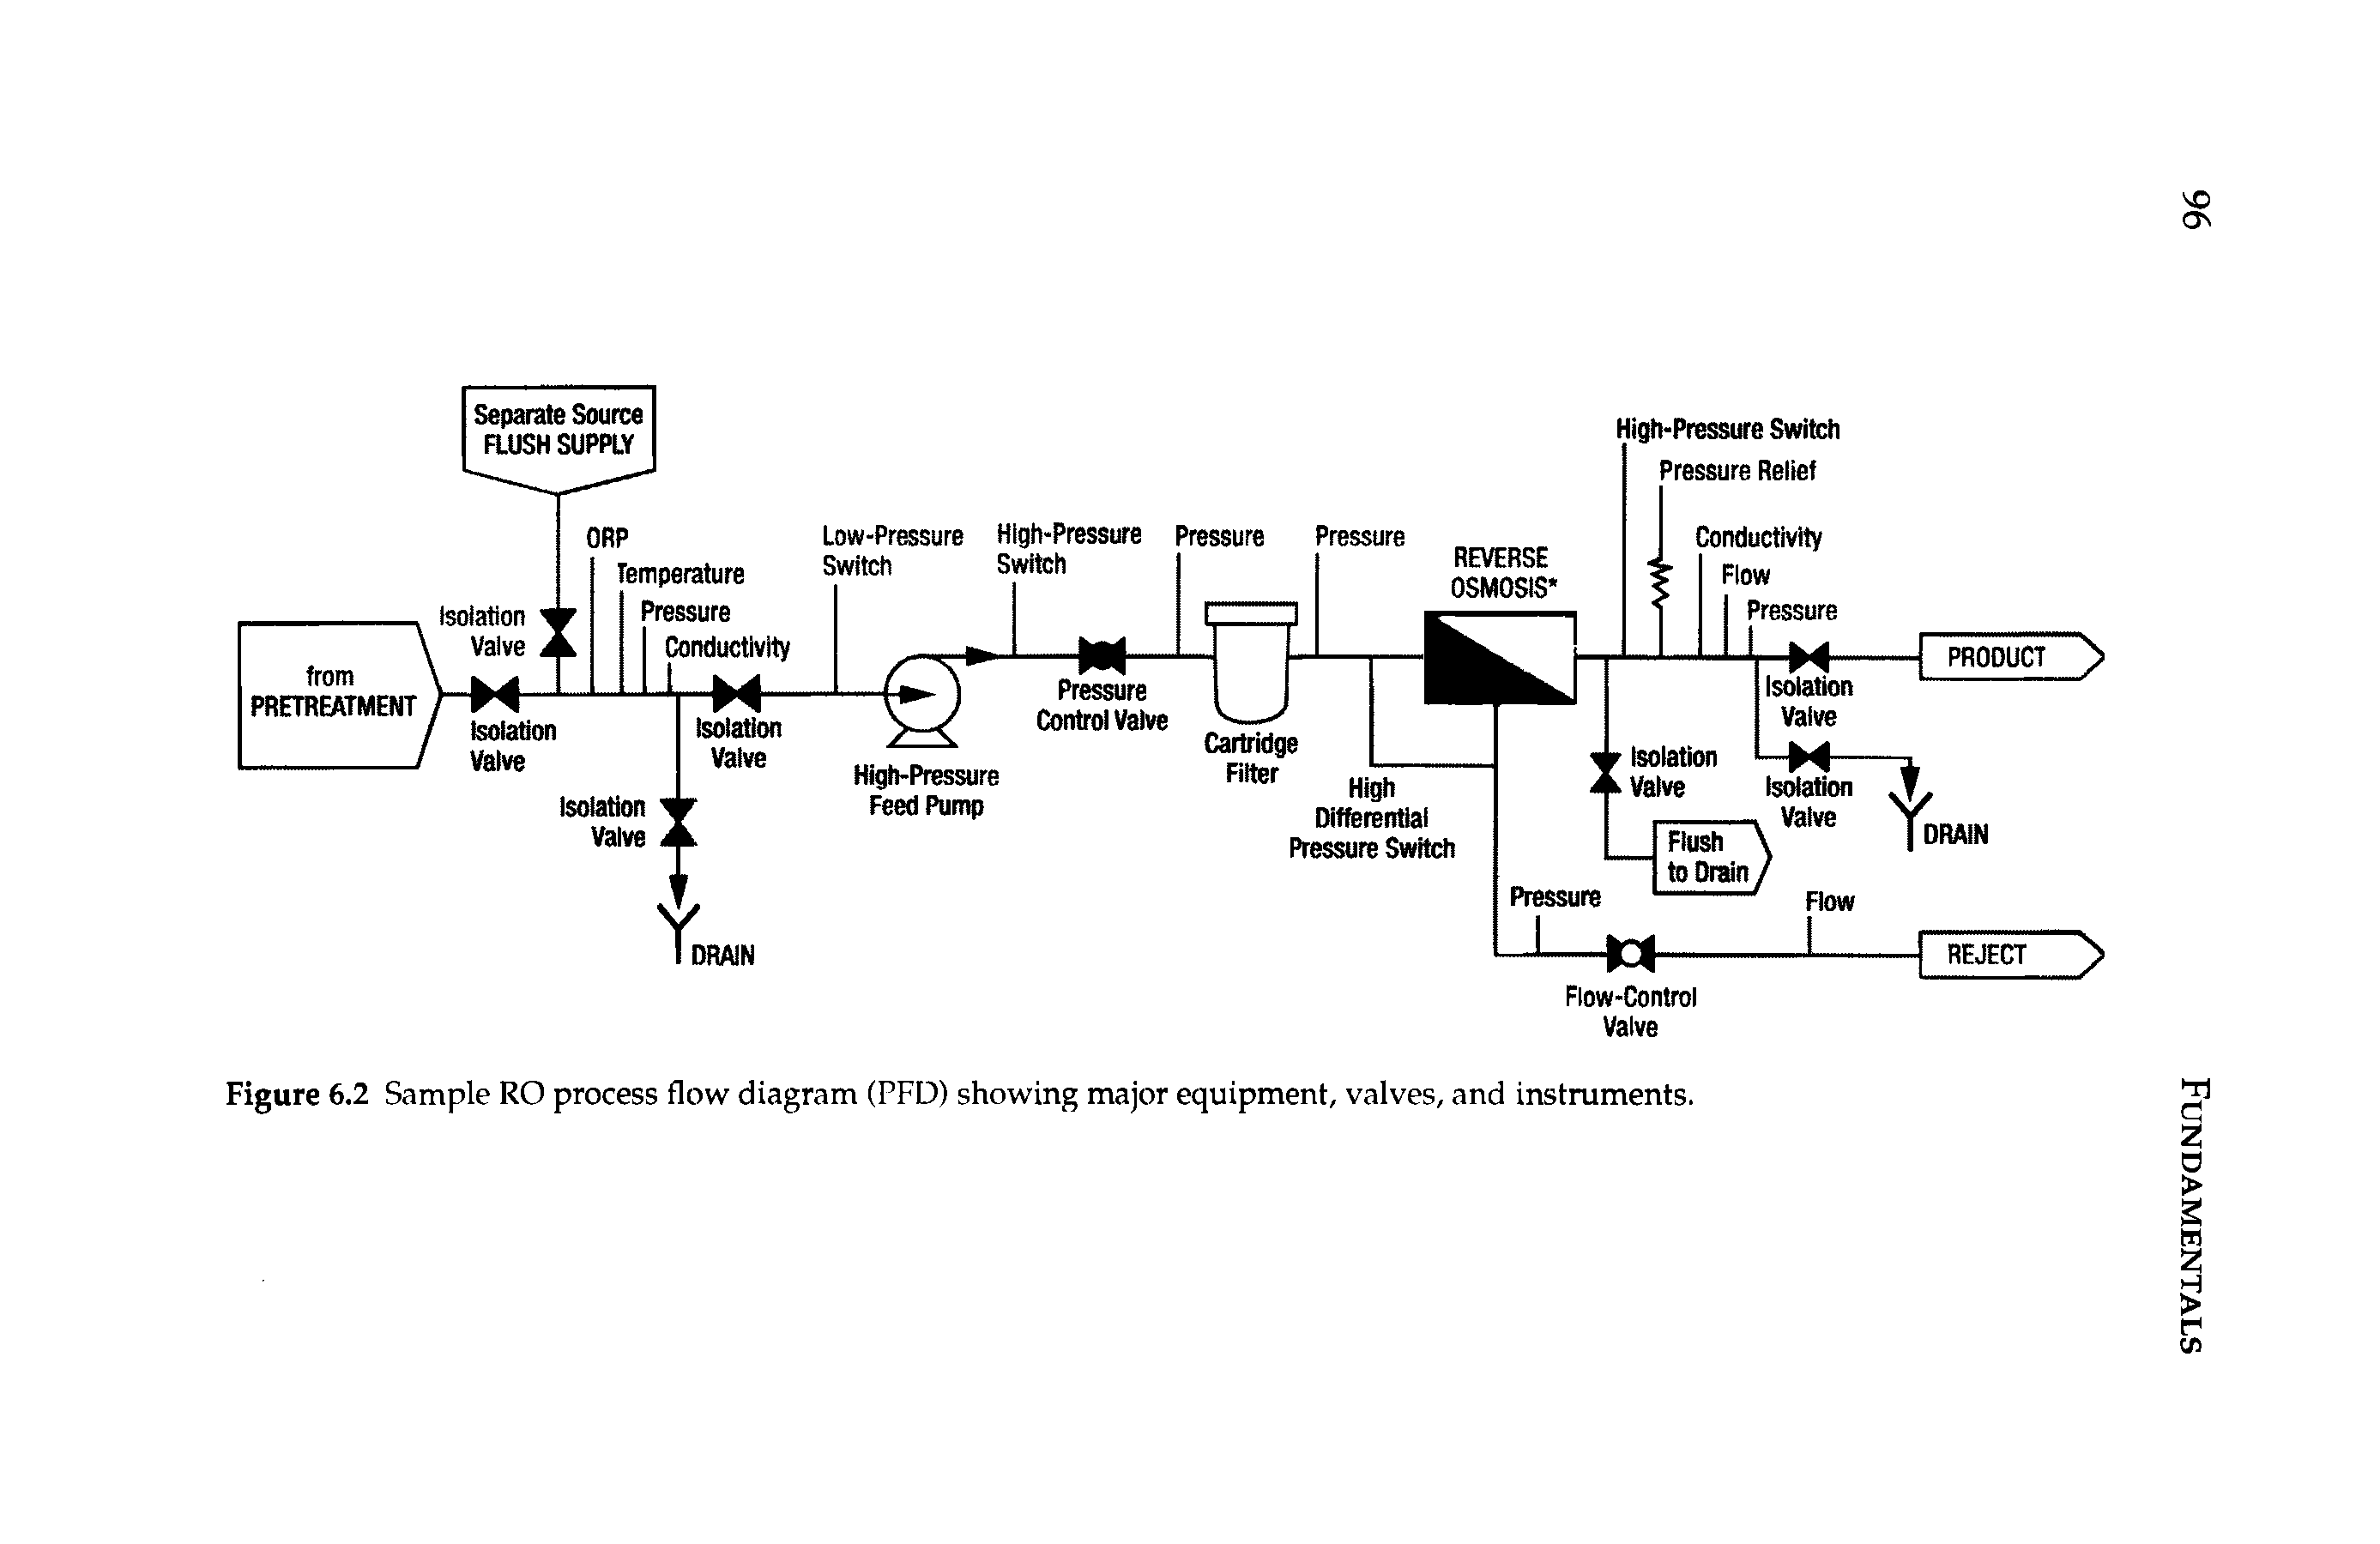 Figure 6.2 Sample RO process flow diagram (PFD) showing major equipment, valves, and instruments.